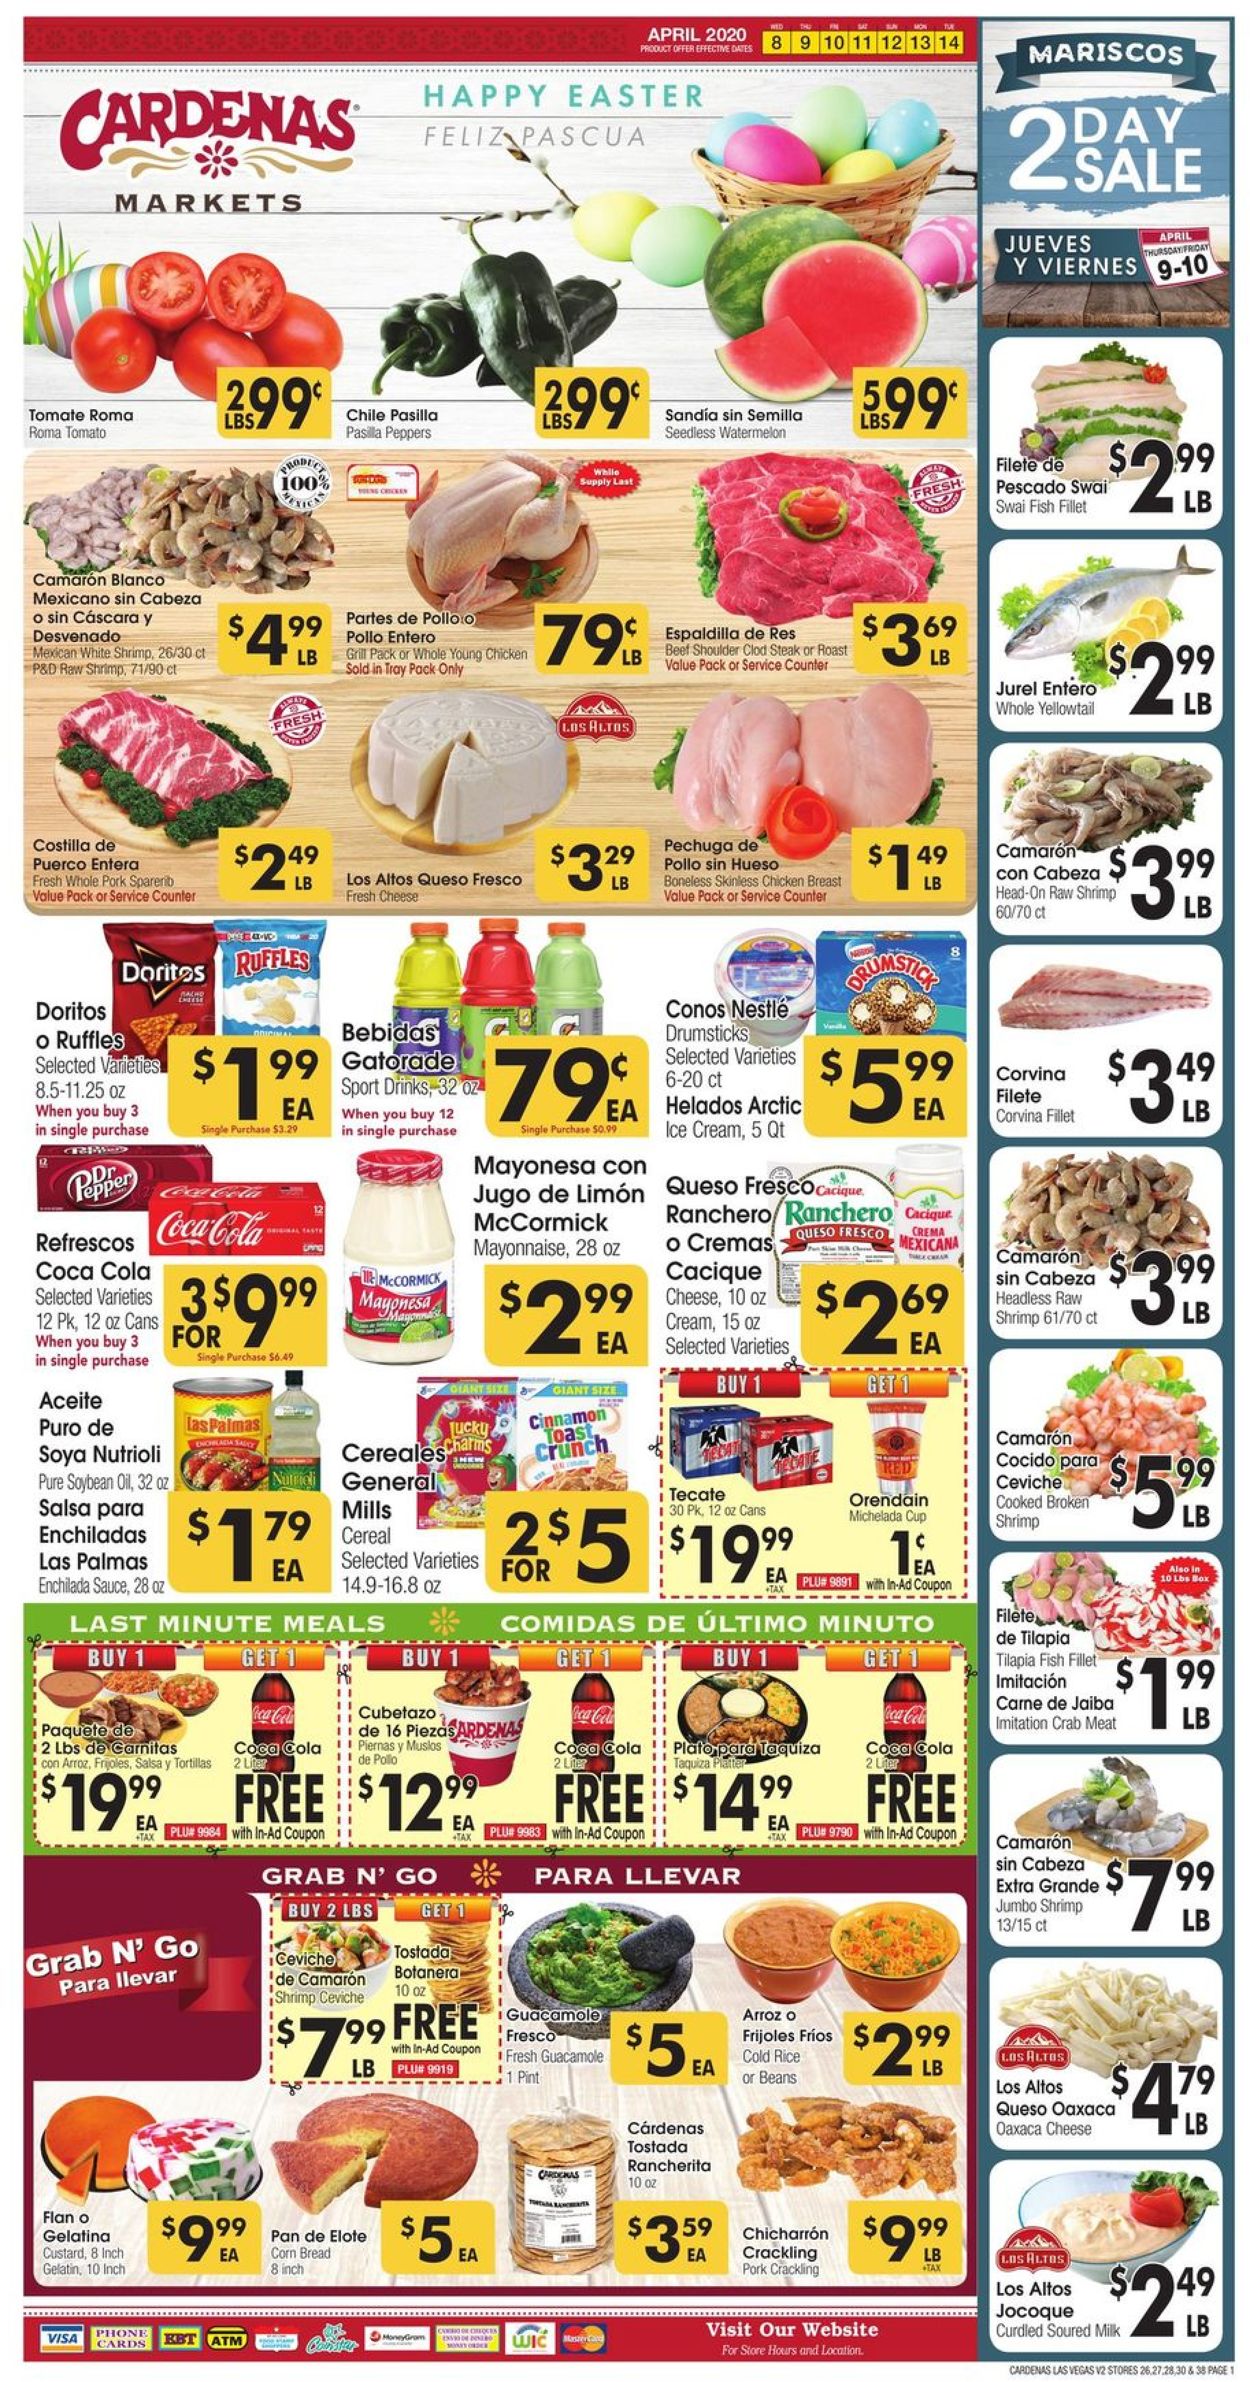 Cardenas Current weekly ad 04/08 - 04/14/2020 - frequent-ads.com